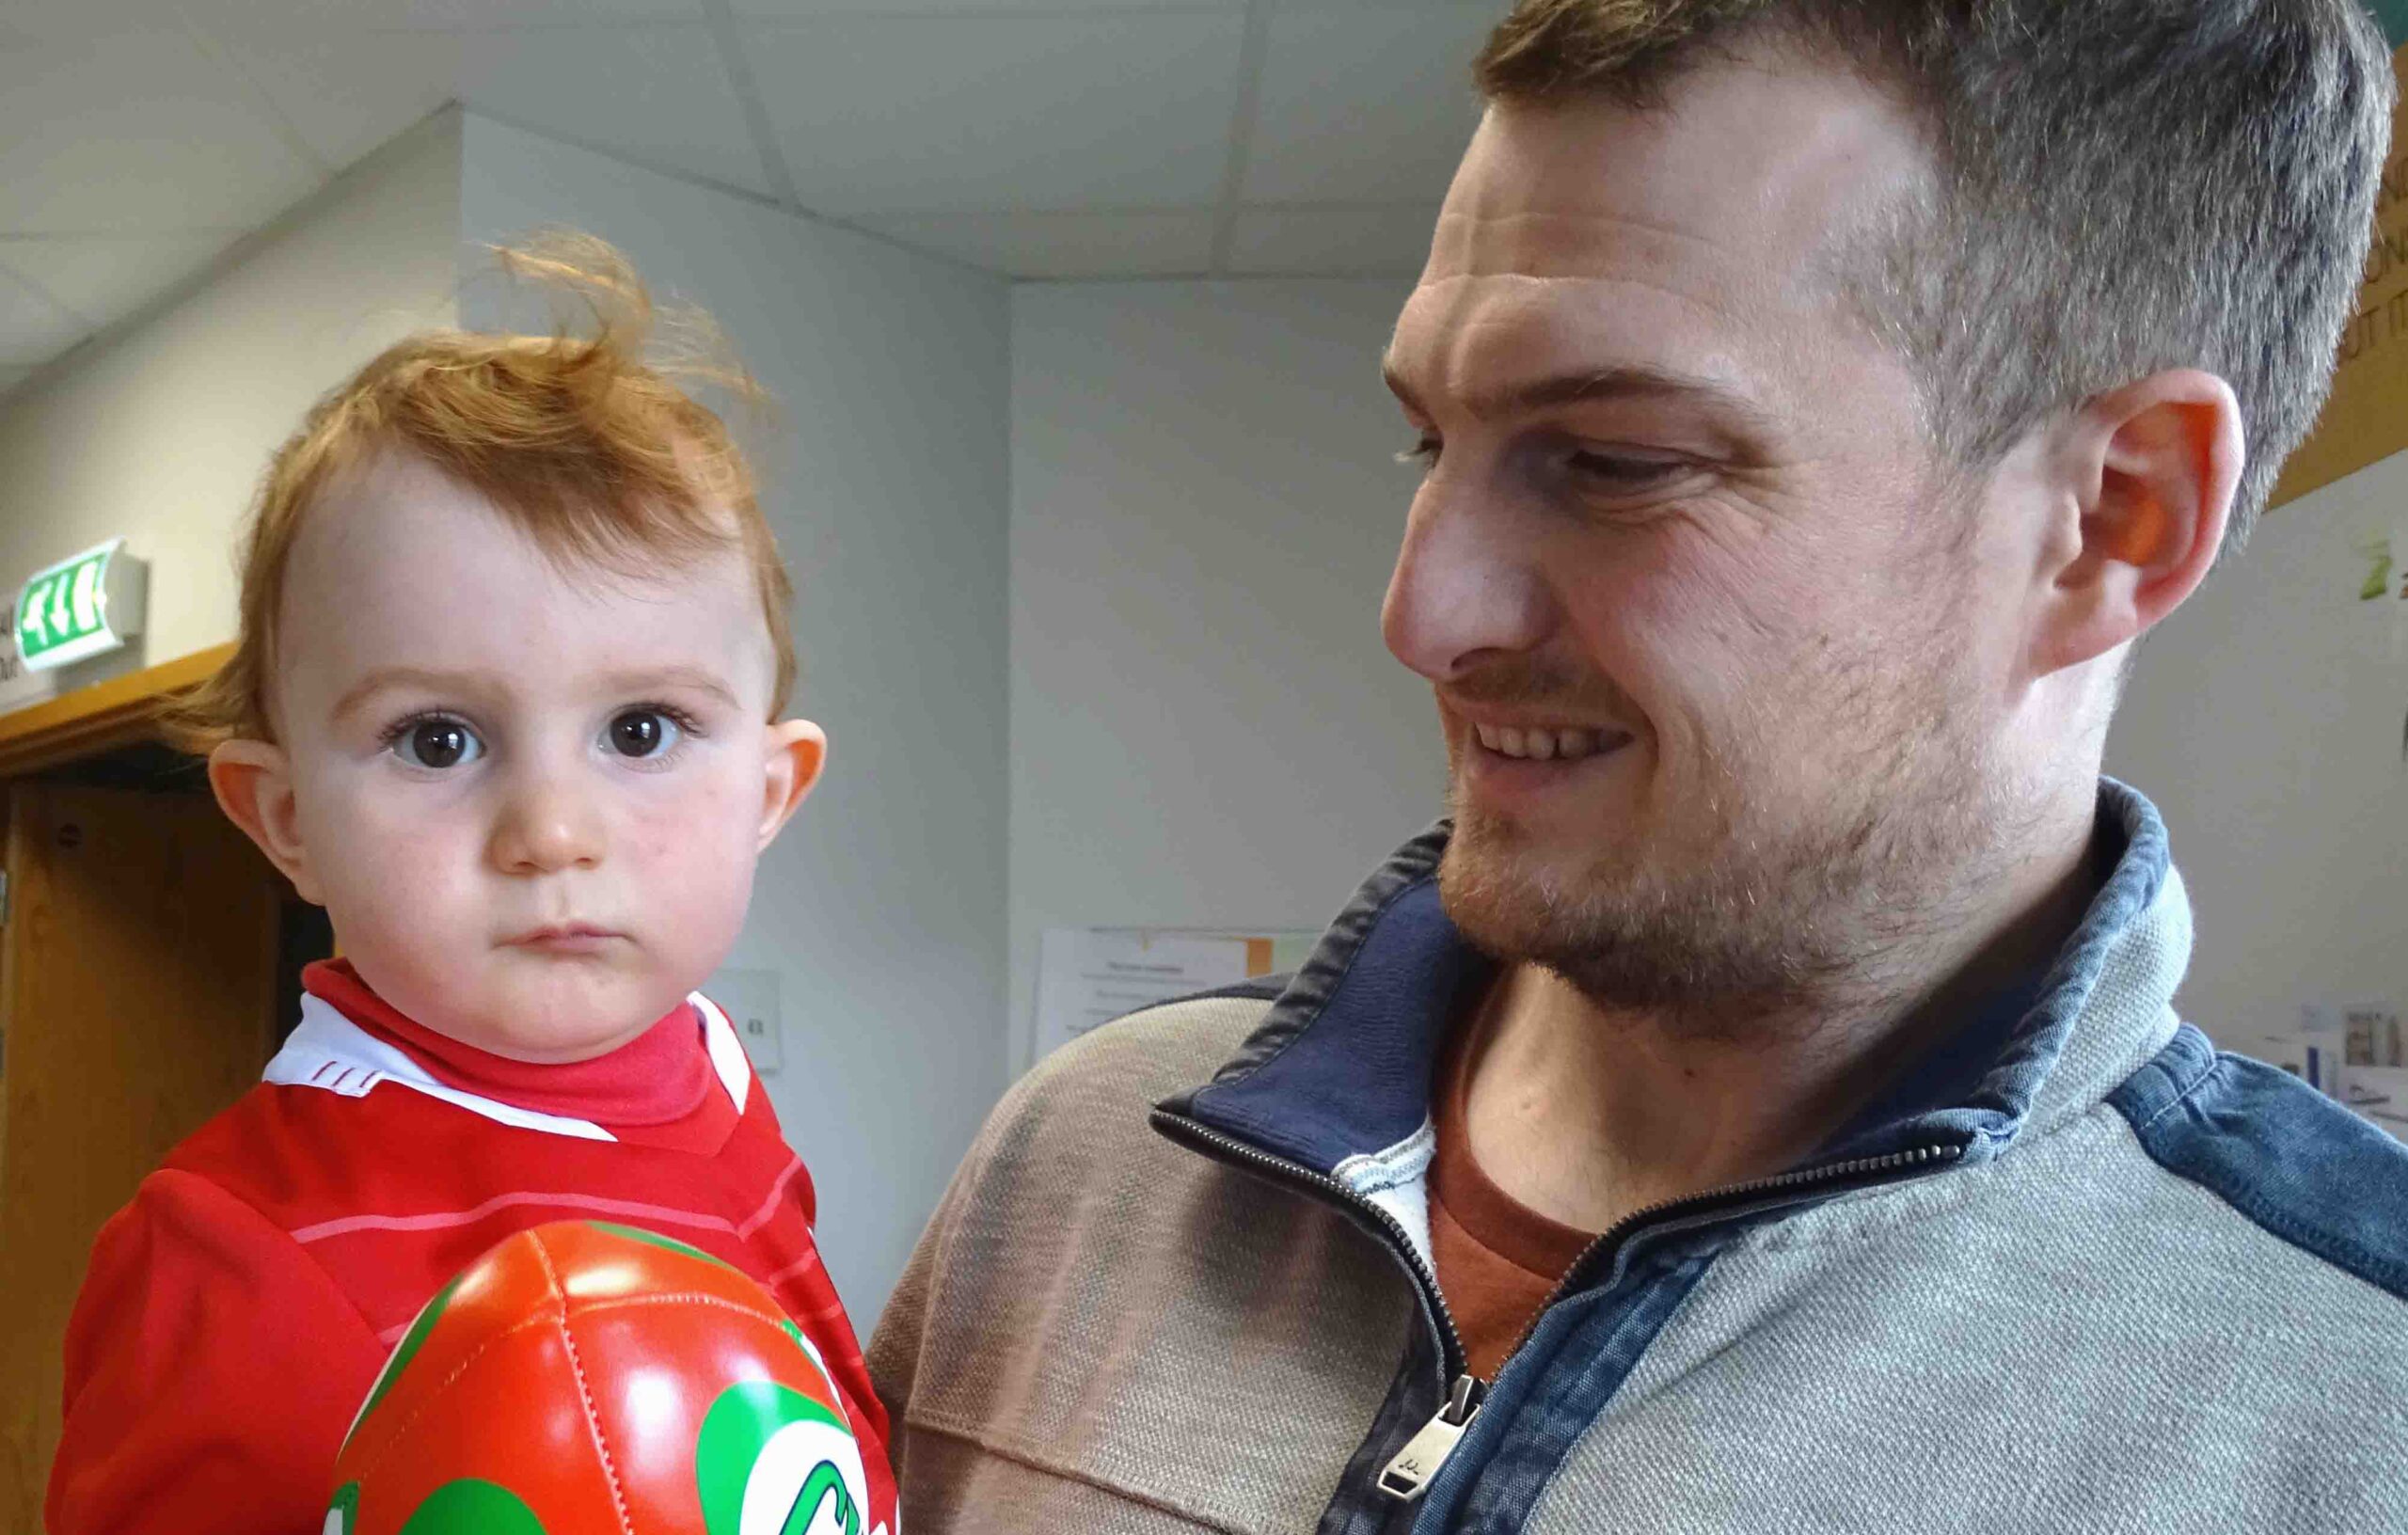 High-tech leg gives dad the confidence to carry his baby son without fear of falling